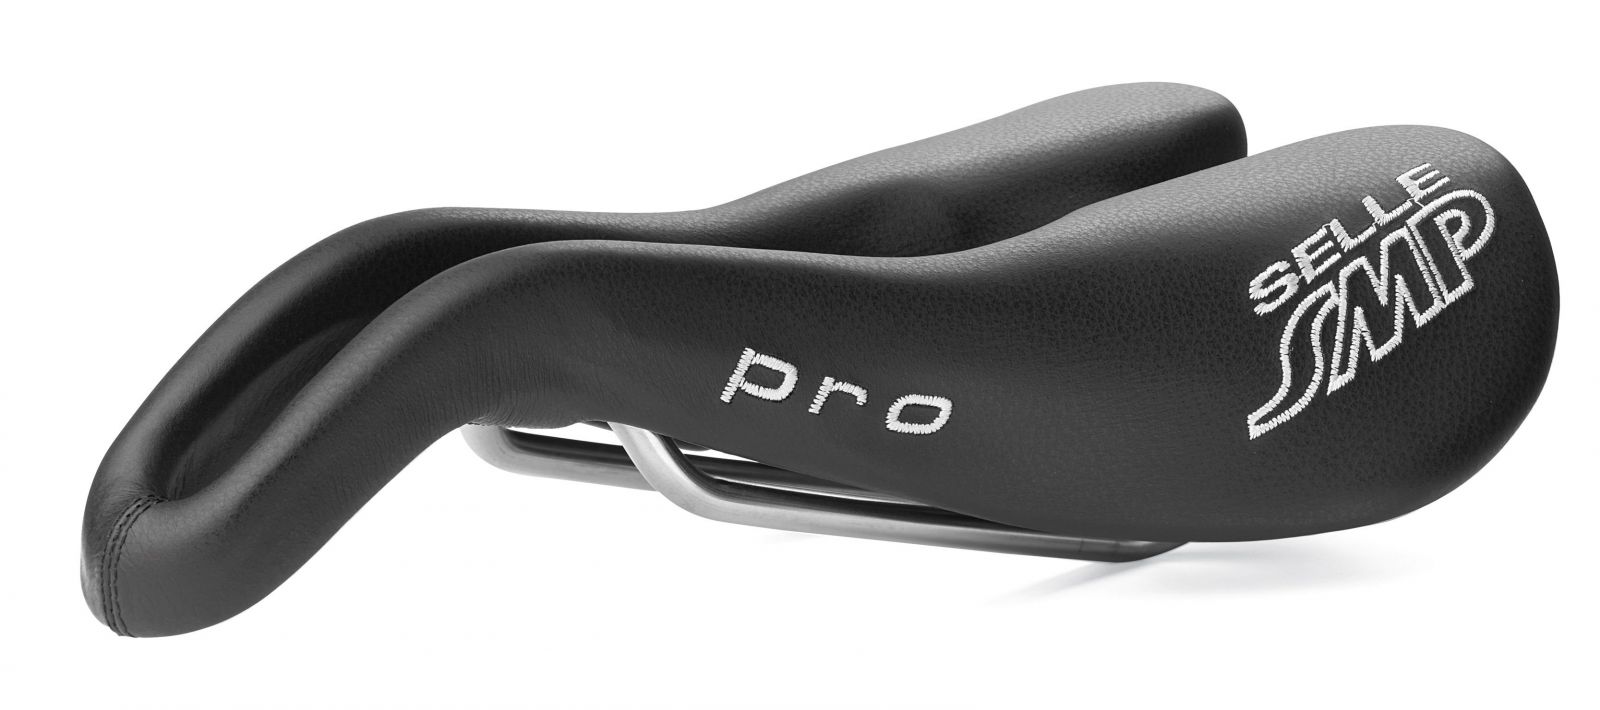 Sedlo SMP Selle Pro 320 g Selle SMP